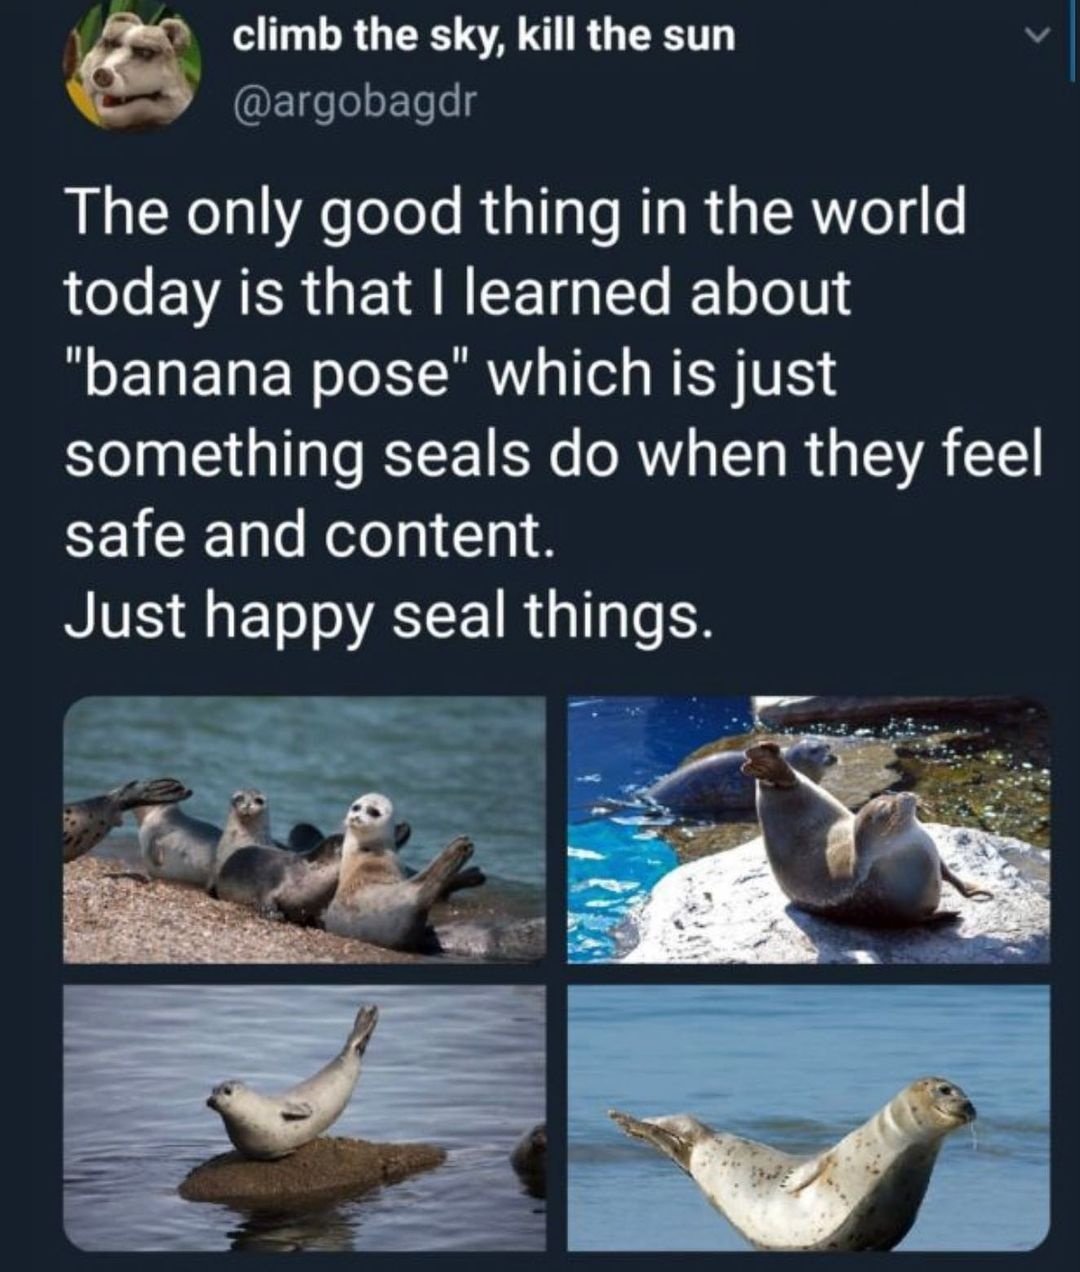 fauna - climb the sky, kill the sun The only good thing in the world today is that I learned about "banana pose" which is just something seals do when they feel safe and content. Just happy seal things.